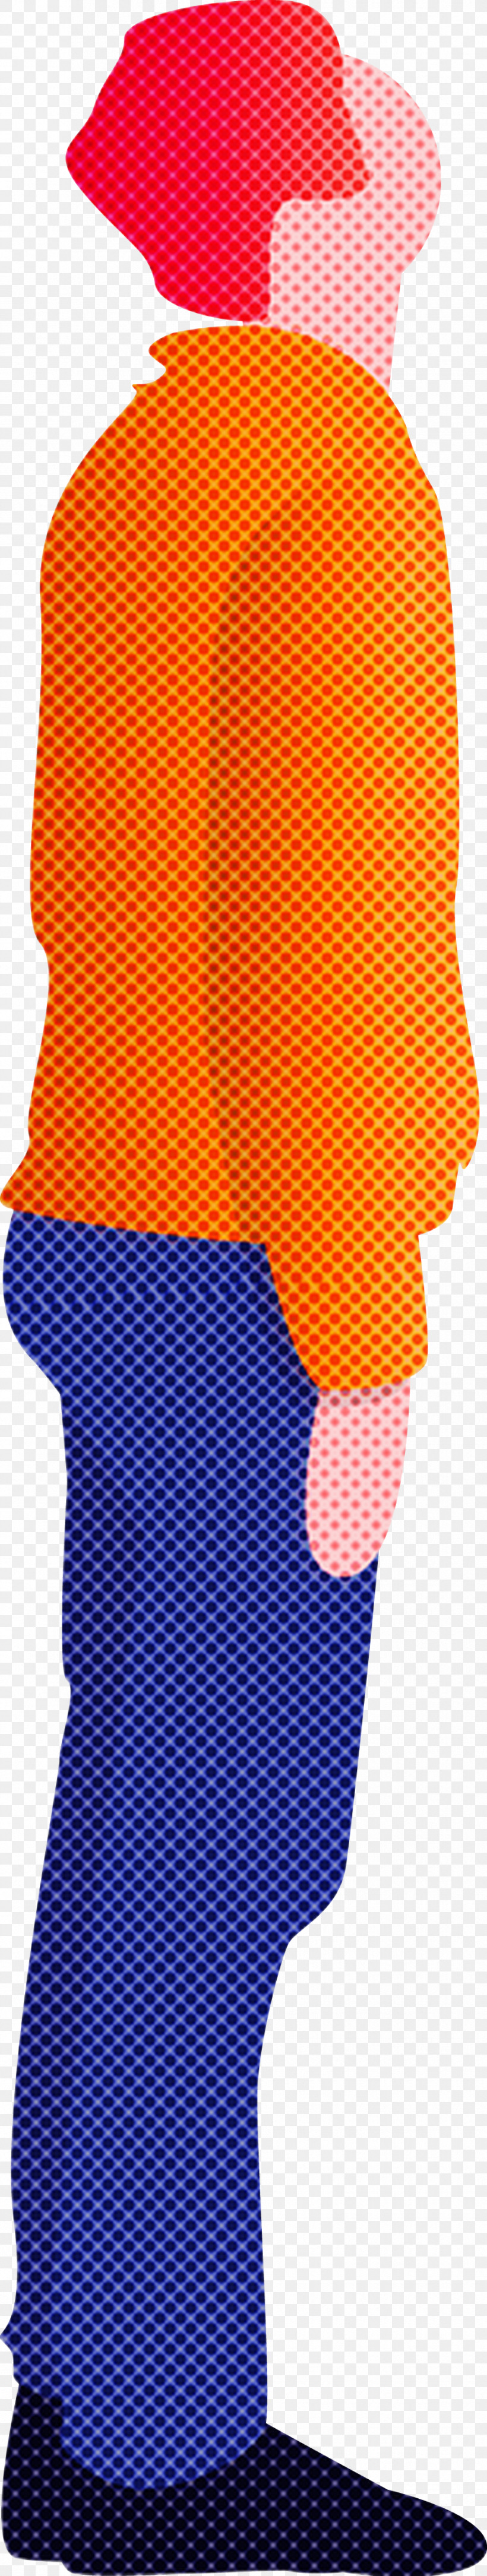 Man Looking Up, PNG, 915x4841px, Man Looking Up, Clothing, Electric Blue, Jersey, Orange Download Free